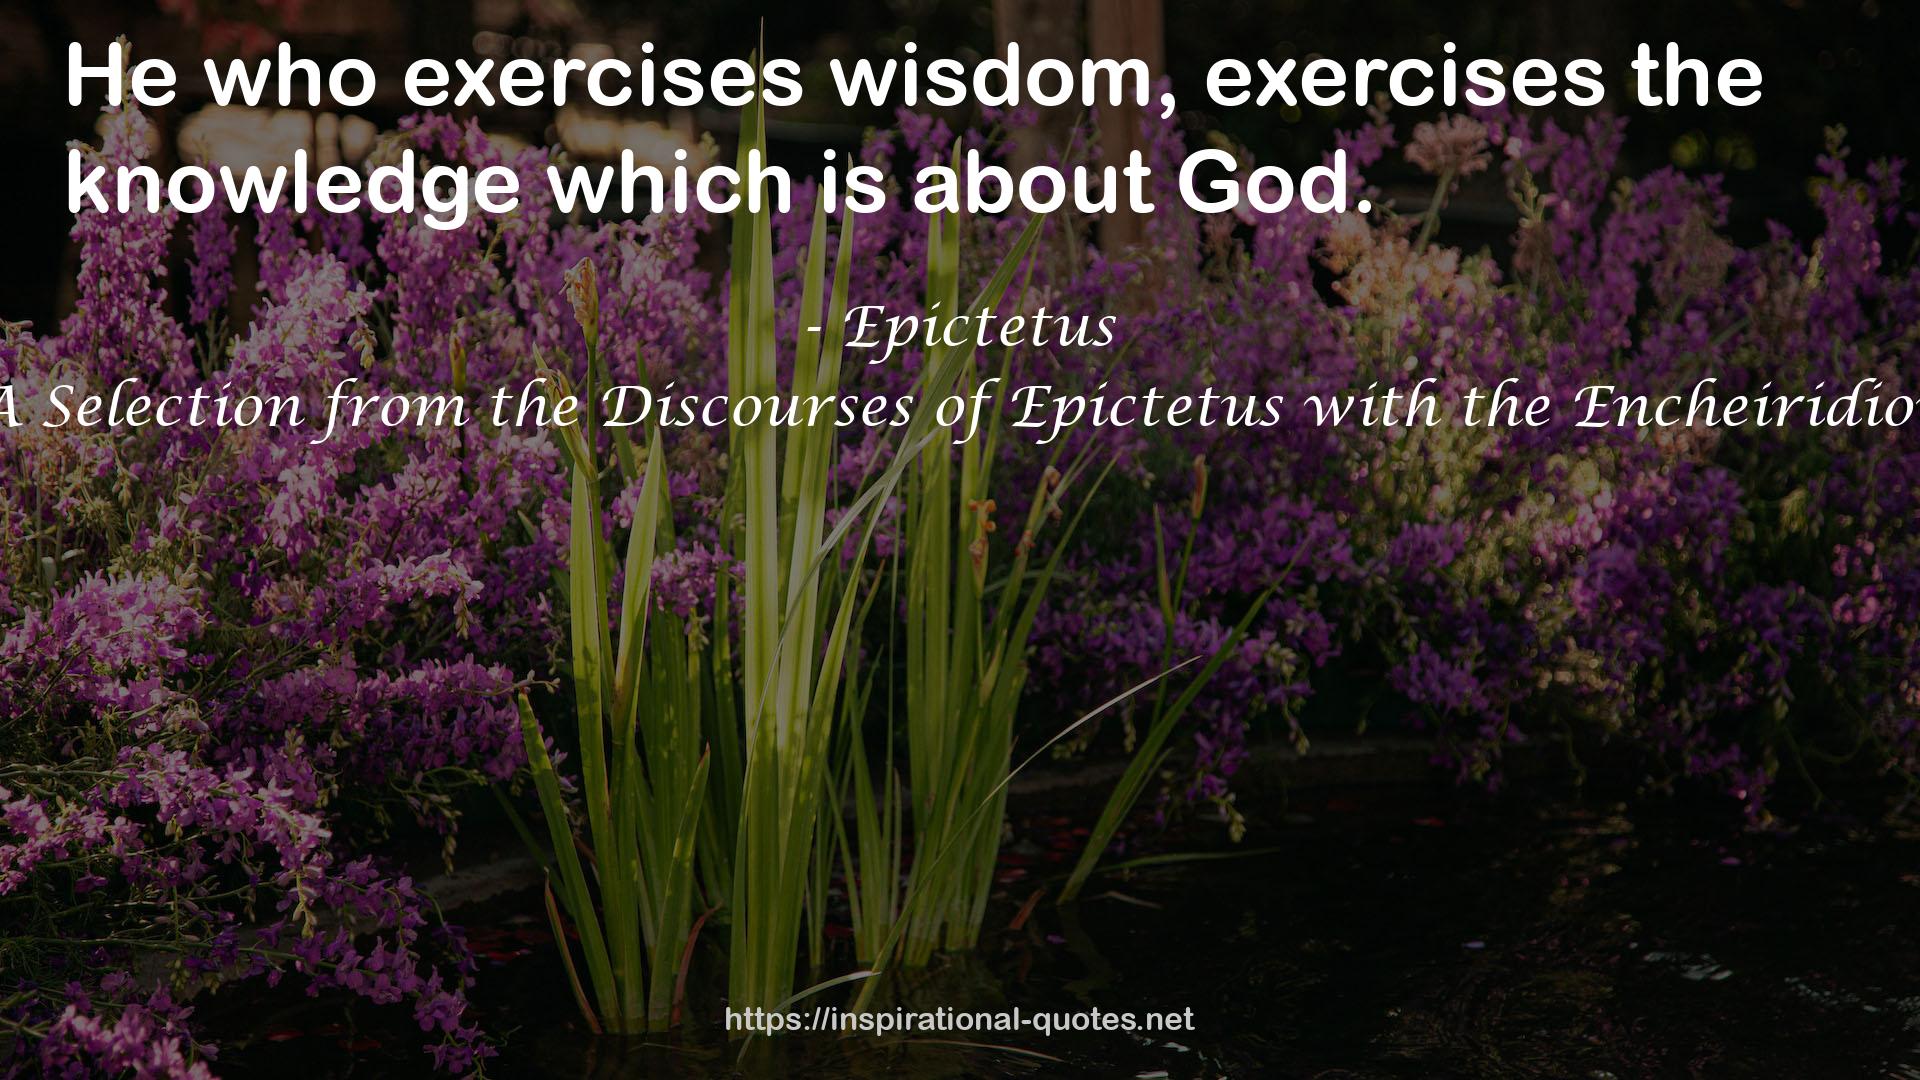 A Selection from the Discourses of Epictetus with the Encheiridion QUOTES